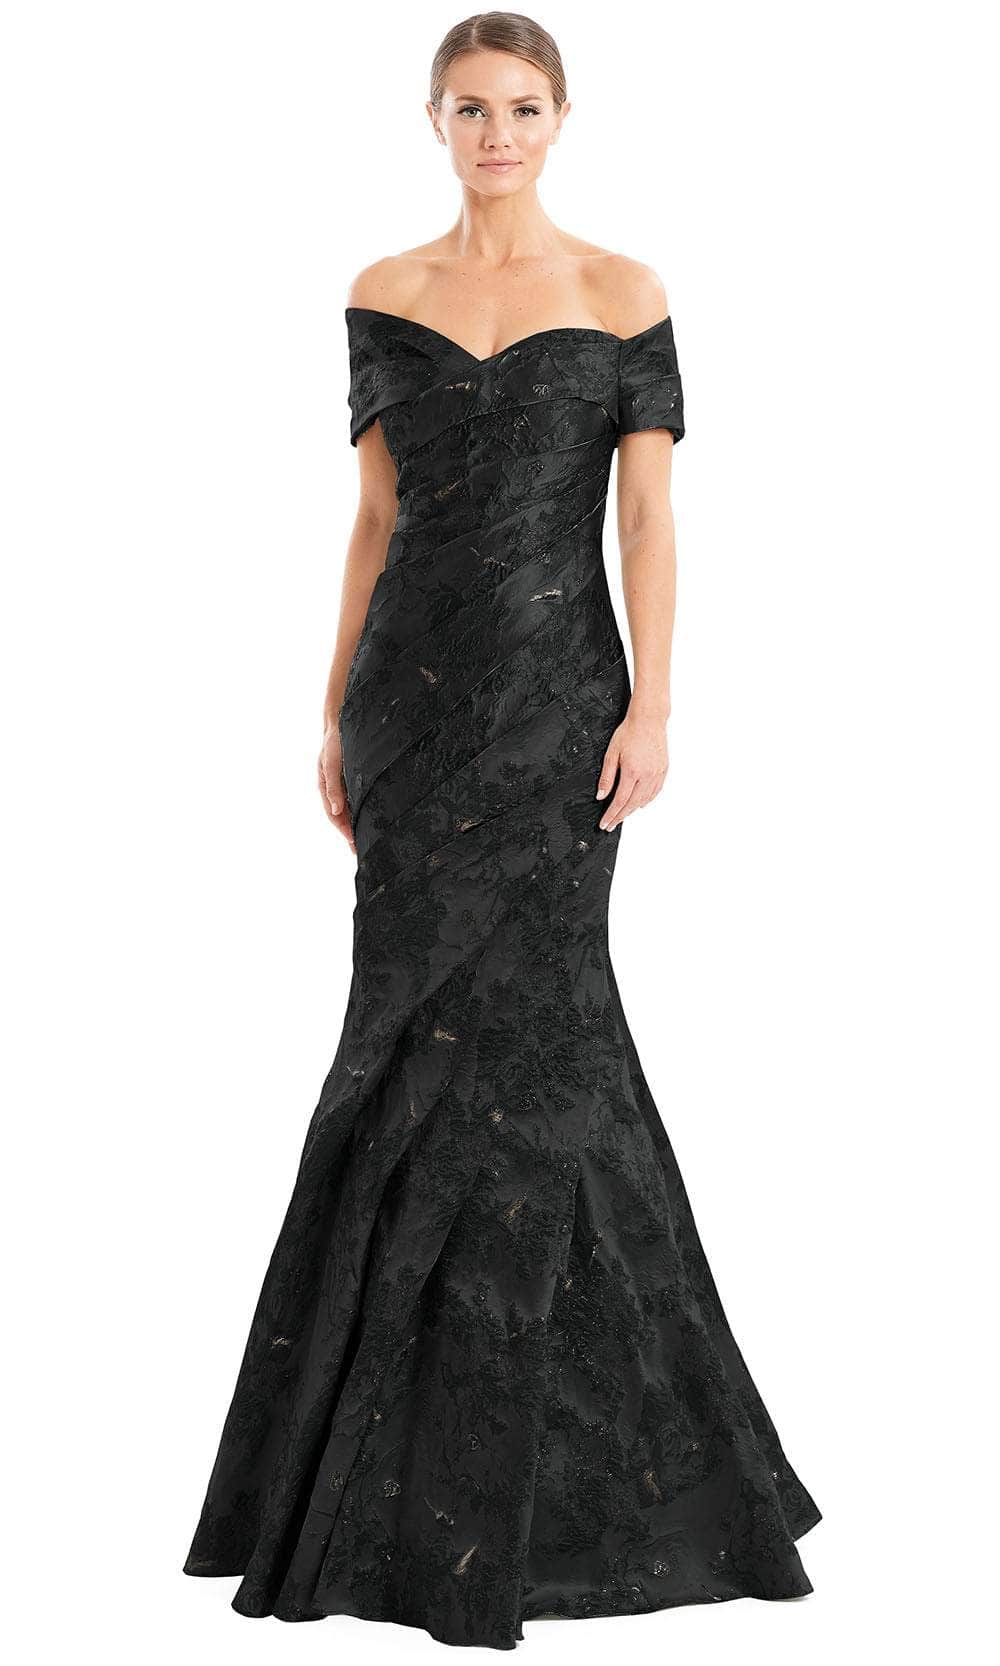 Alexander By Daymor 1666F22 - Faux Wrap Mermaid Gown Special Occasion Dress 4 / Black/Gold